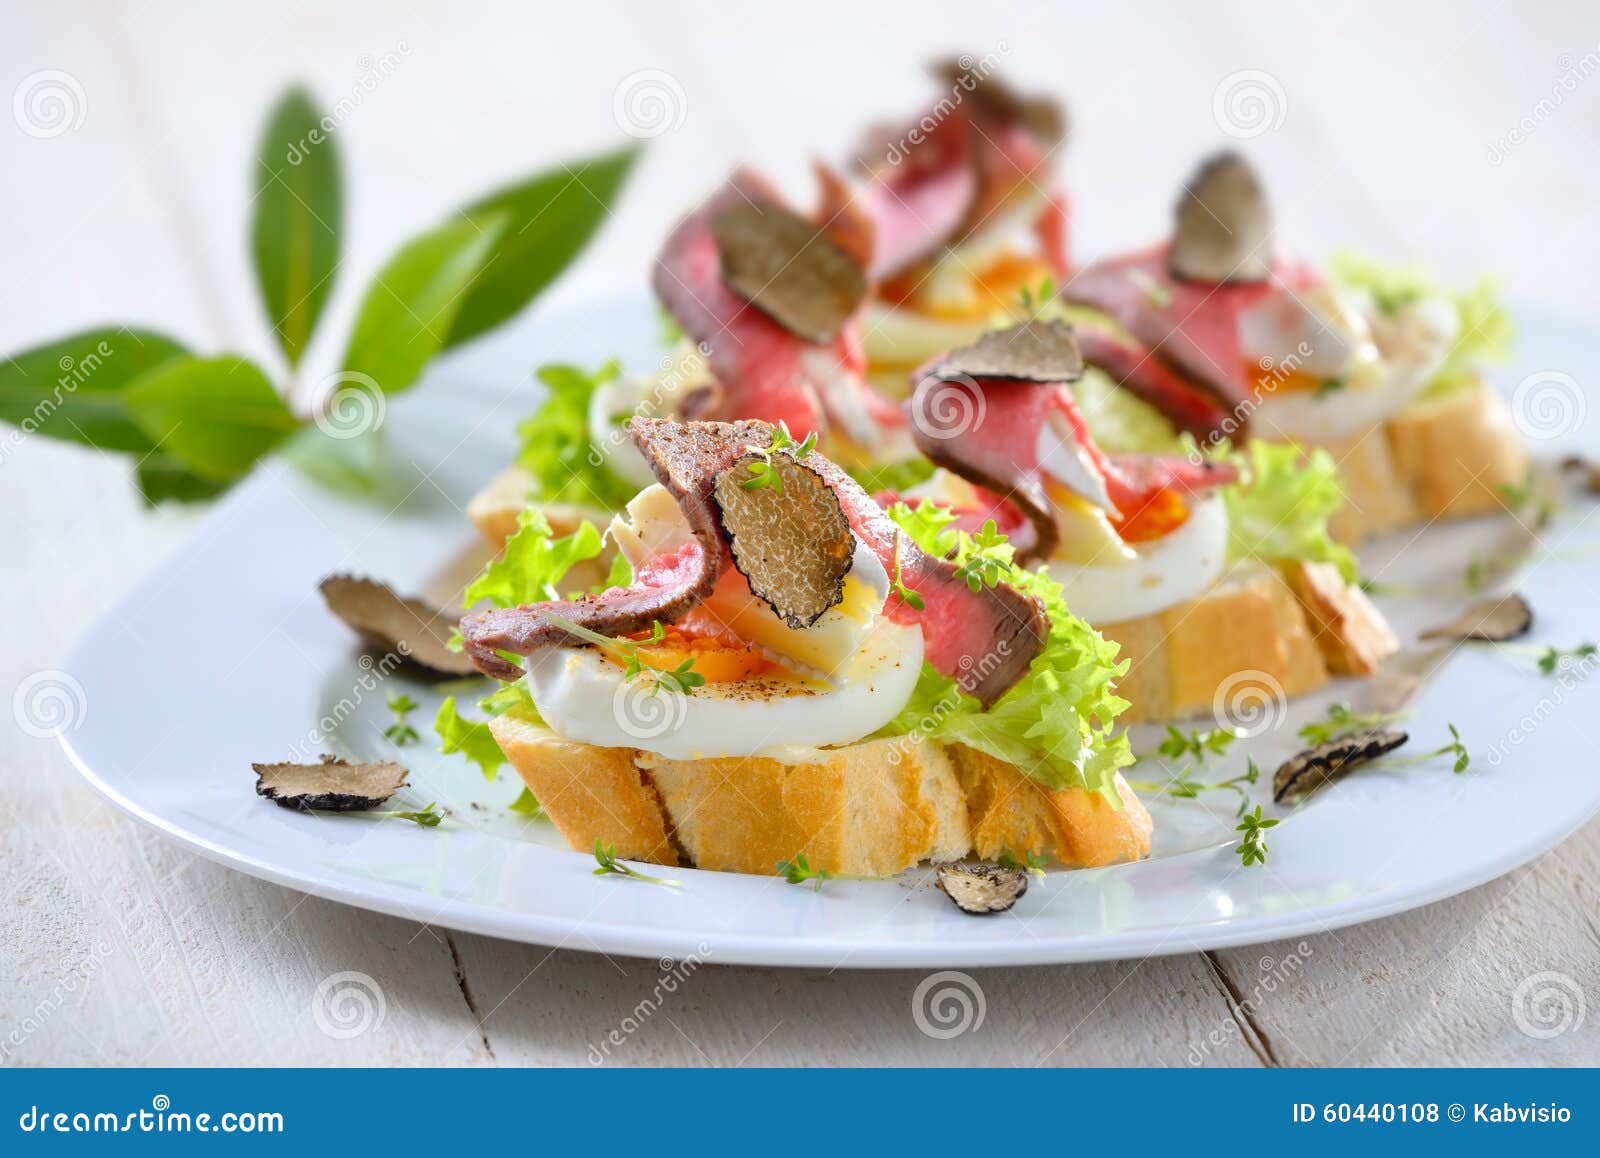 Canapes with Roast Beef and Truffles Stock Photo - Image of cuisine ...